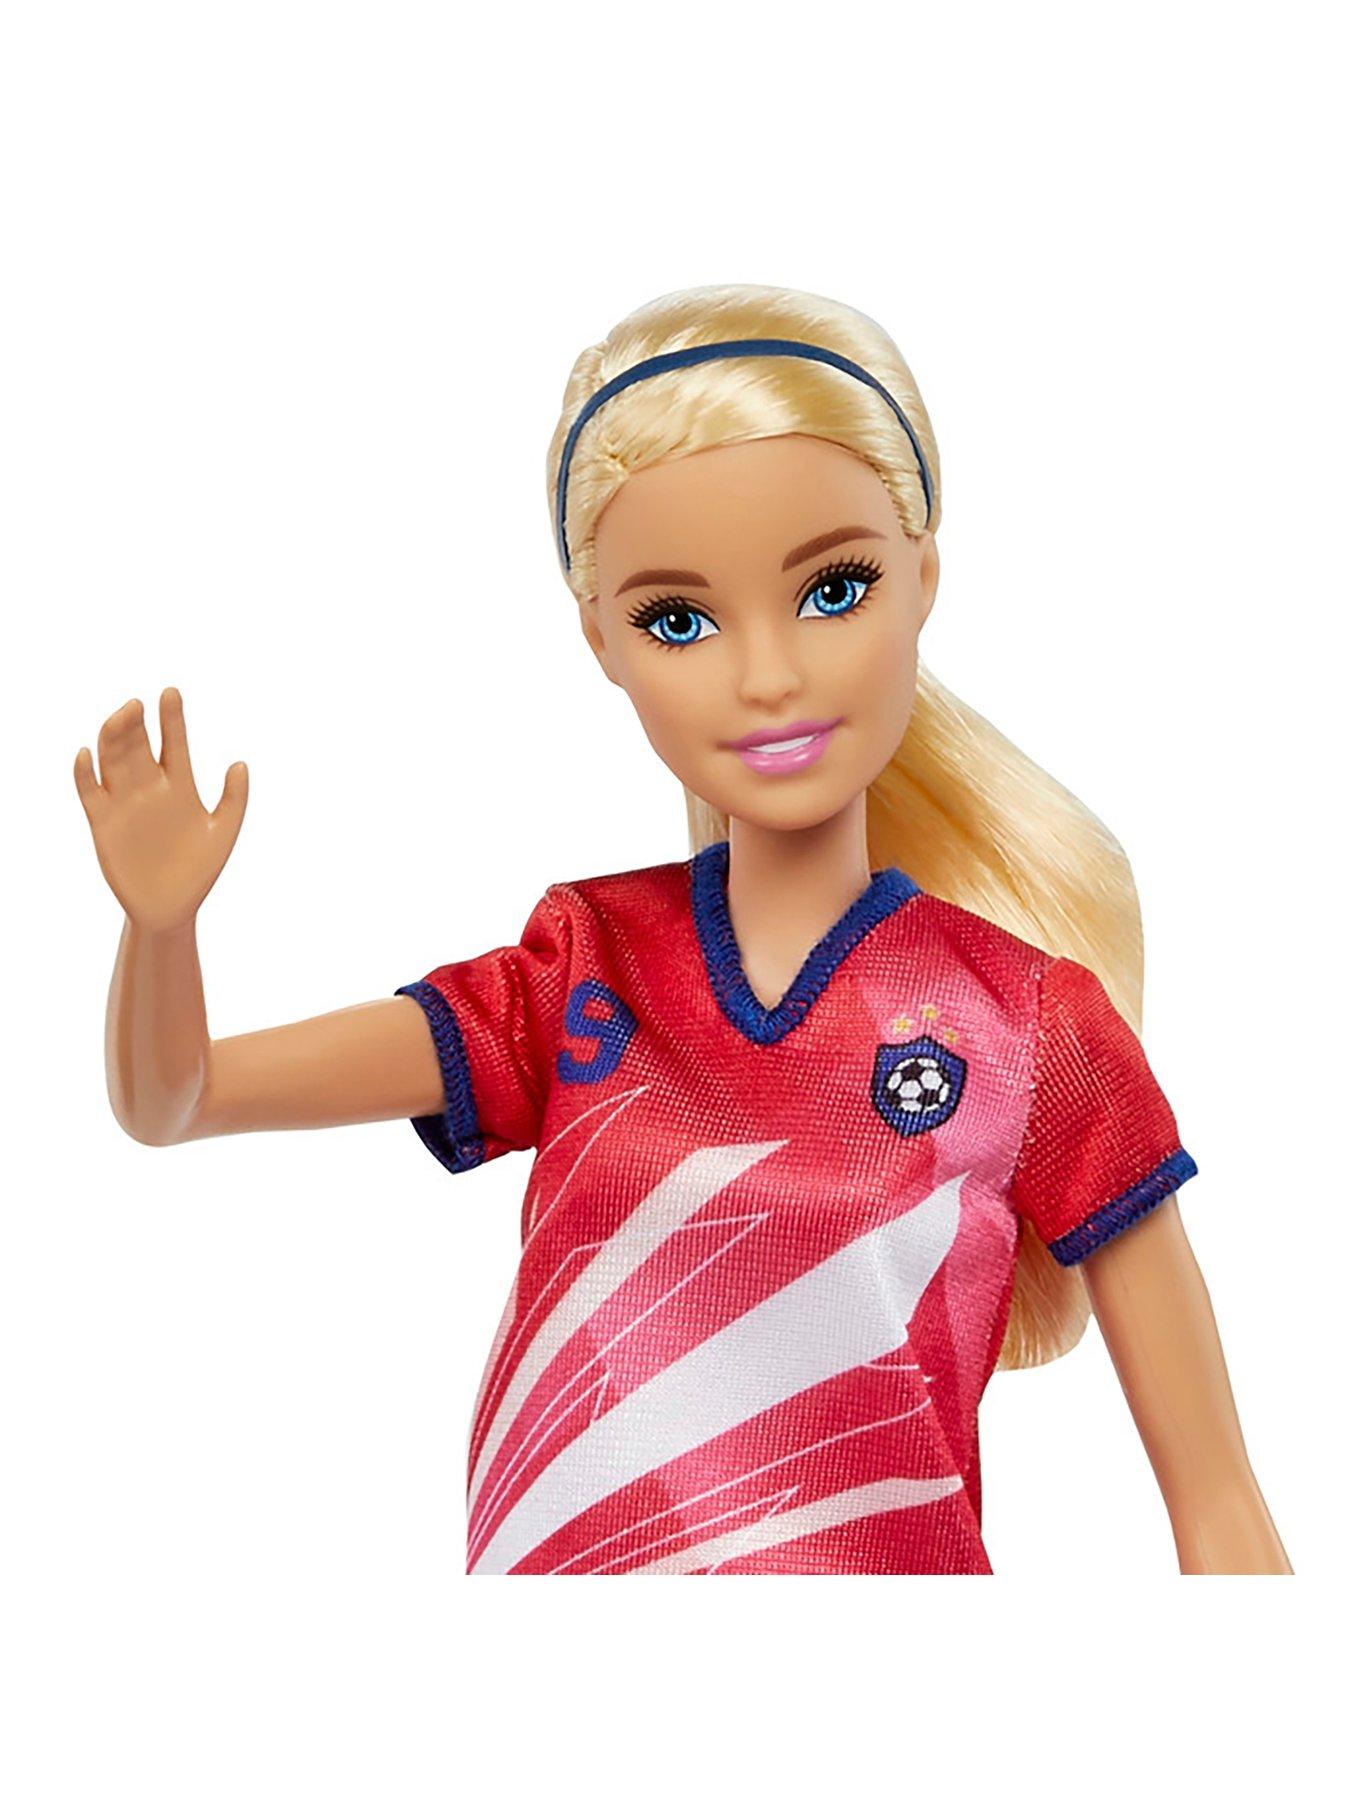 Barbie Doll Soccer Player #9 Blonde Ponytail With Soccer Ball 11 Play Doll